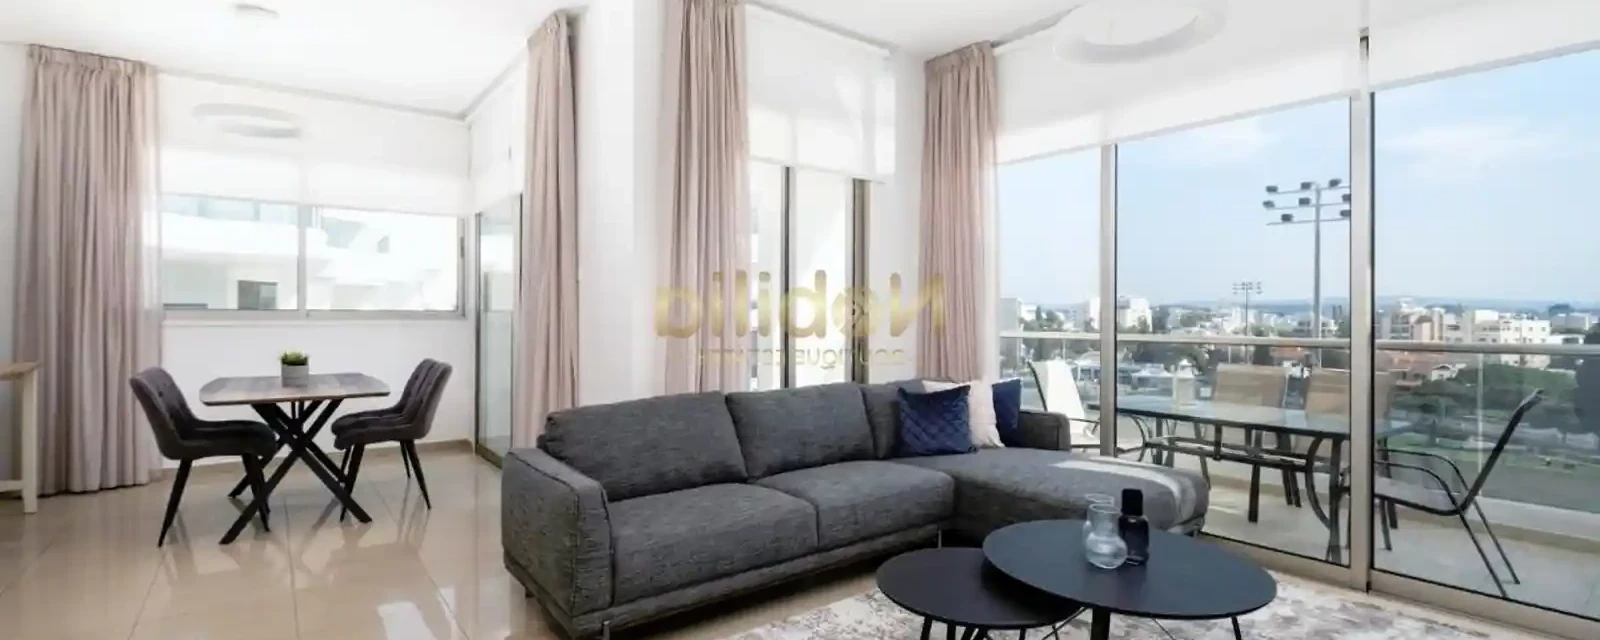 2-bedroom apartment to rent €1.790, image 1